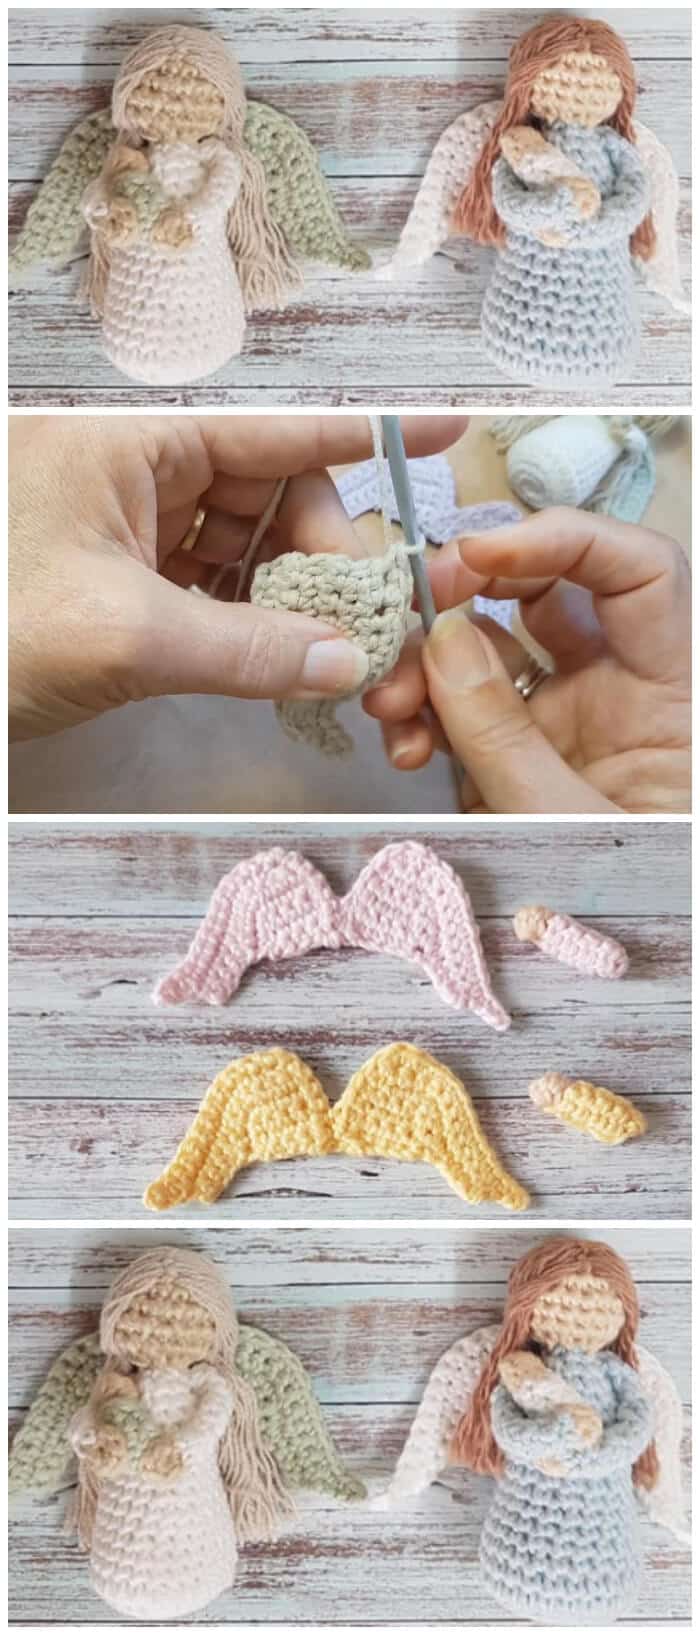 Today we will show you tutorial for crochet Angel Wings. It's a delightful little set that can be worked up within the hour. Enjoy !